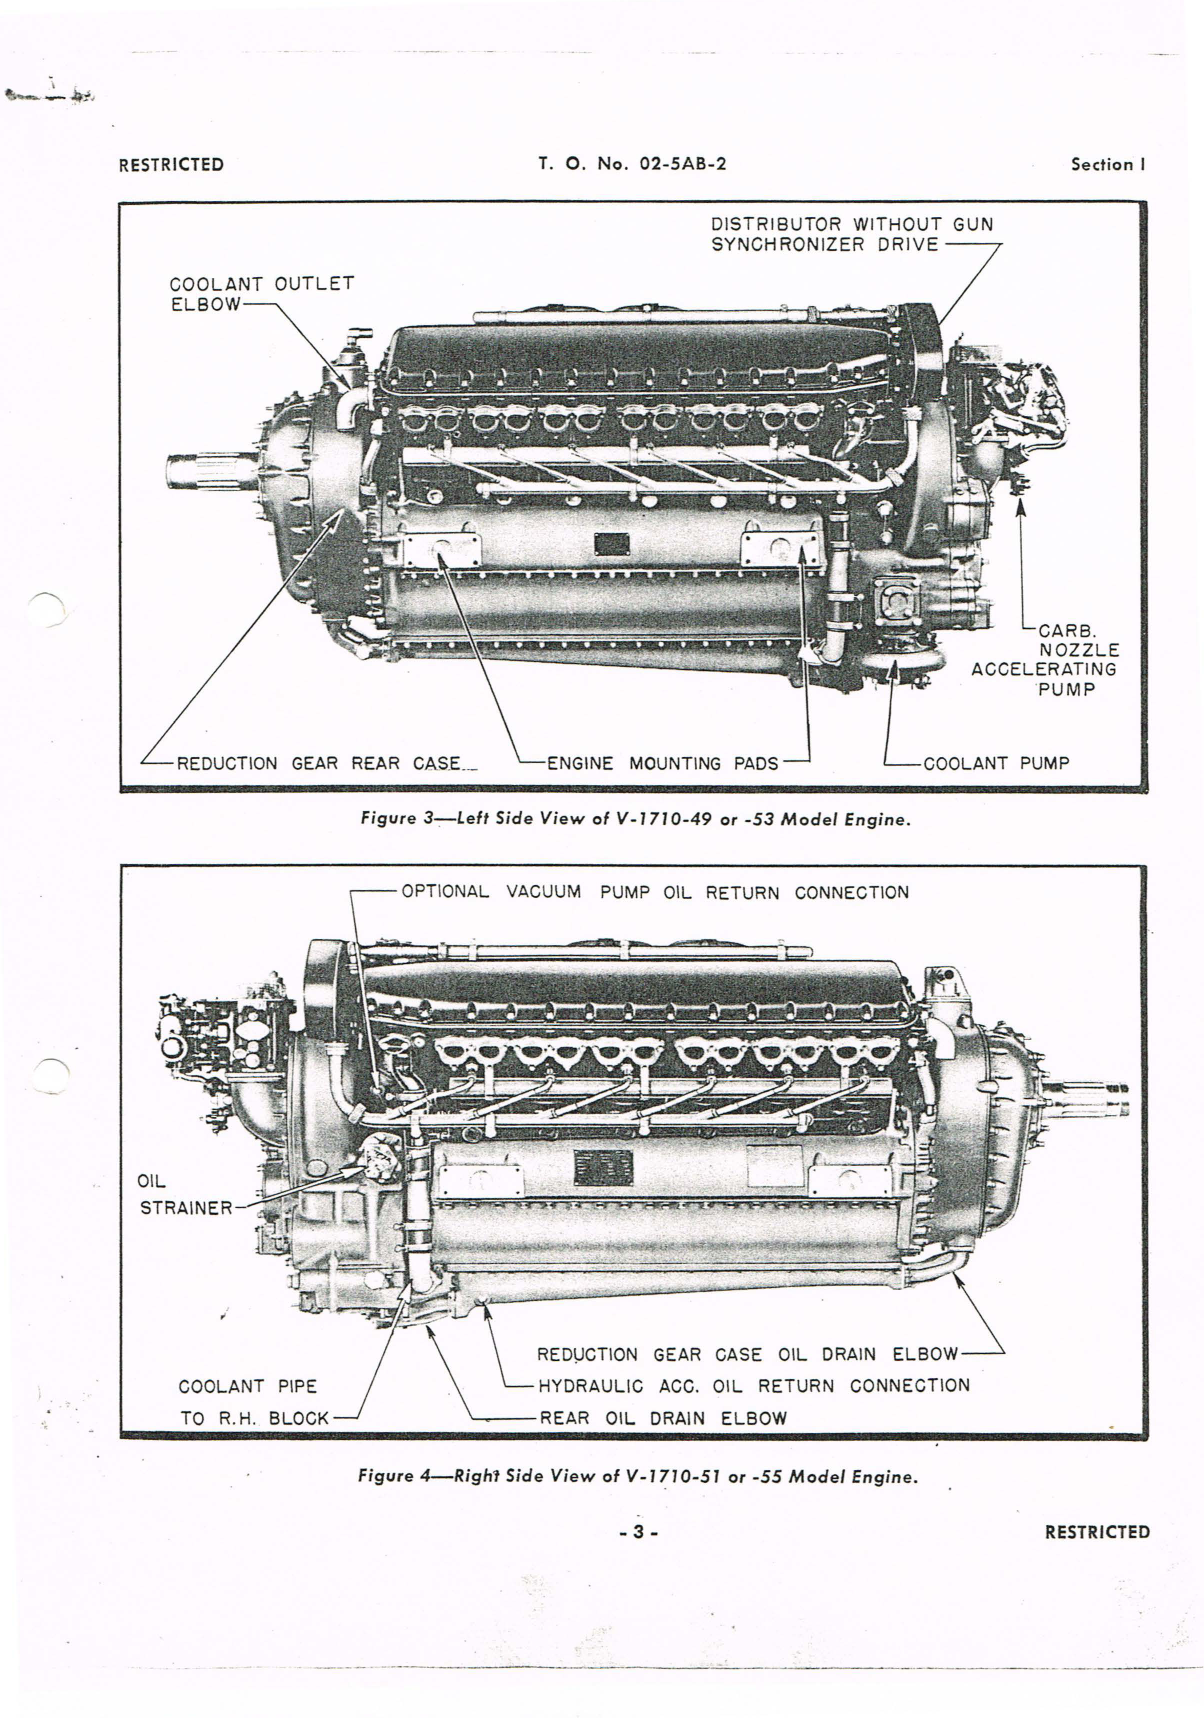 Sample page 9 from AirCorps Library document: Service Instructions for V-1710 Series Engines